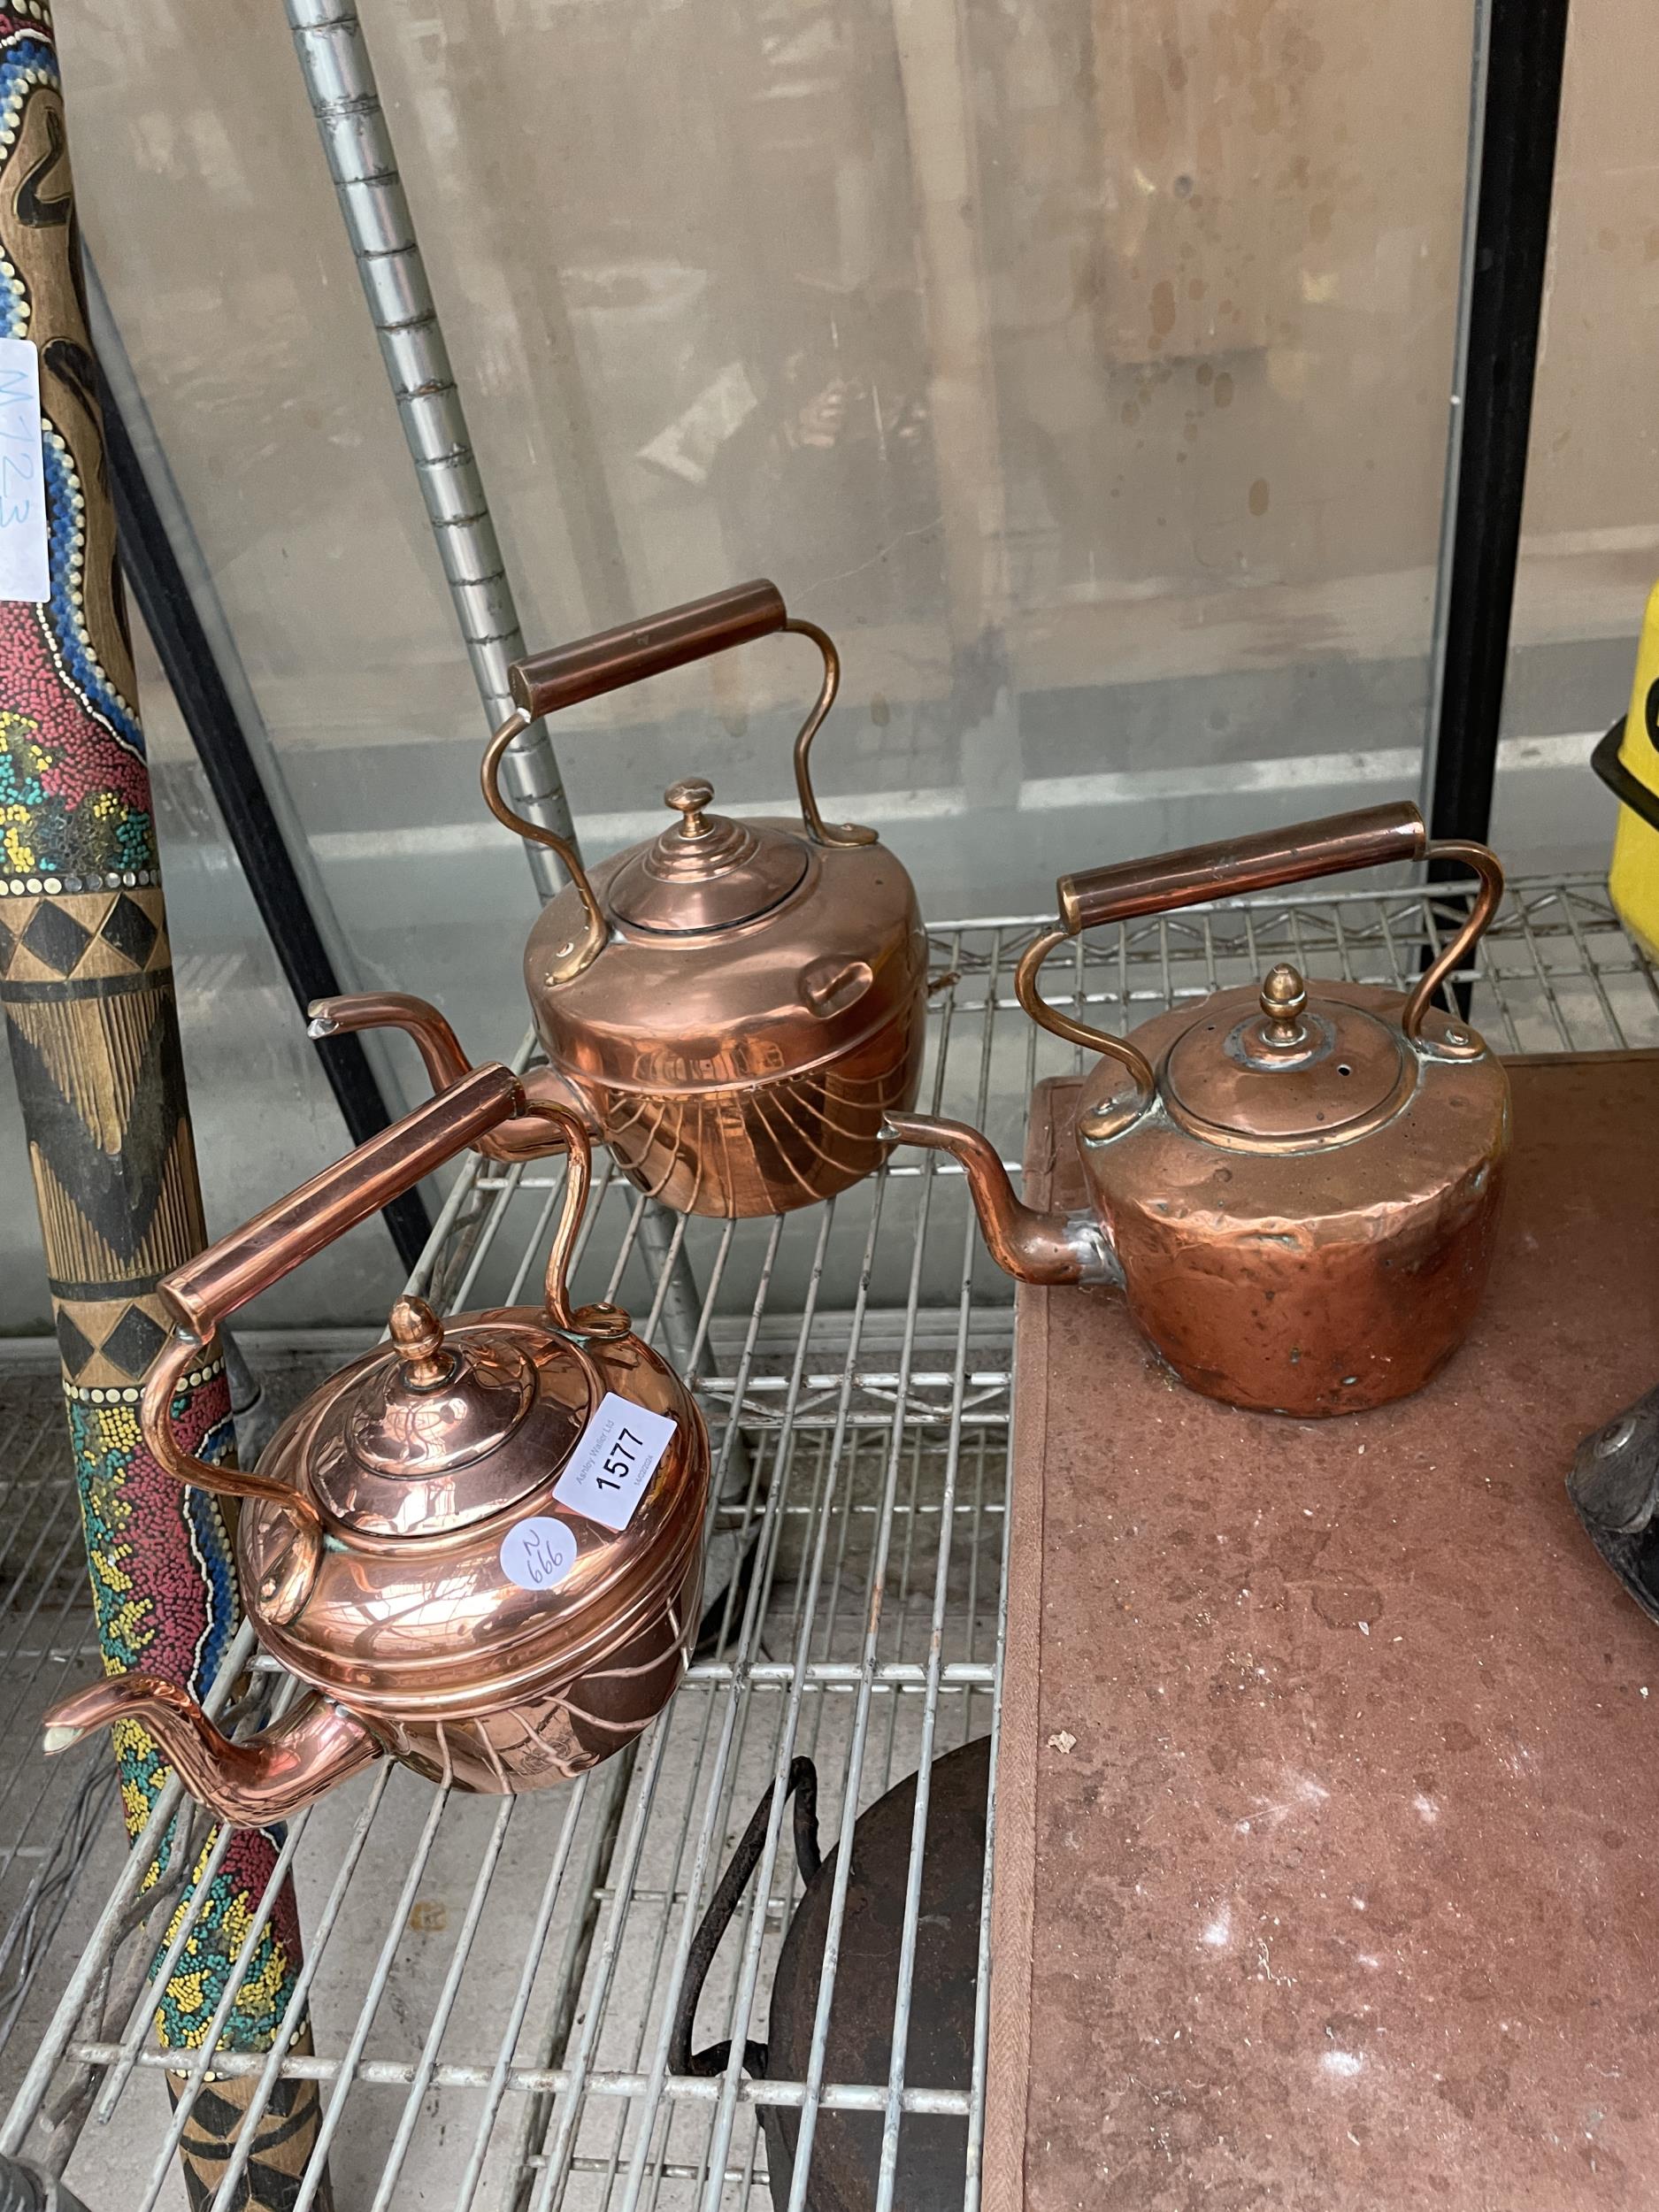 THREE SMALL COPPER KETTLES